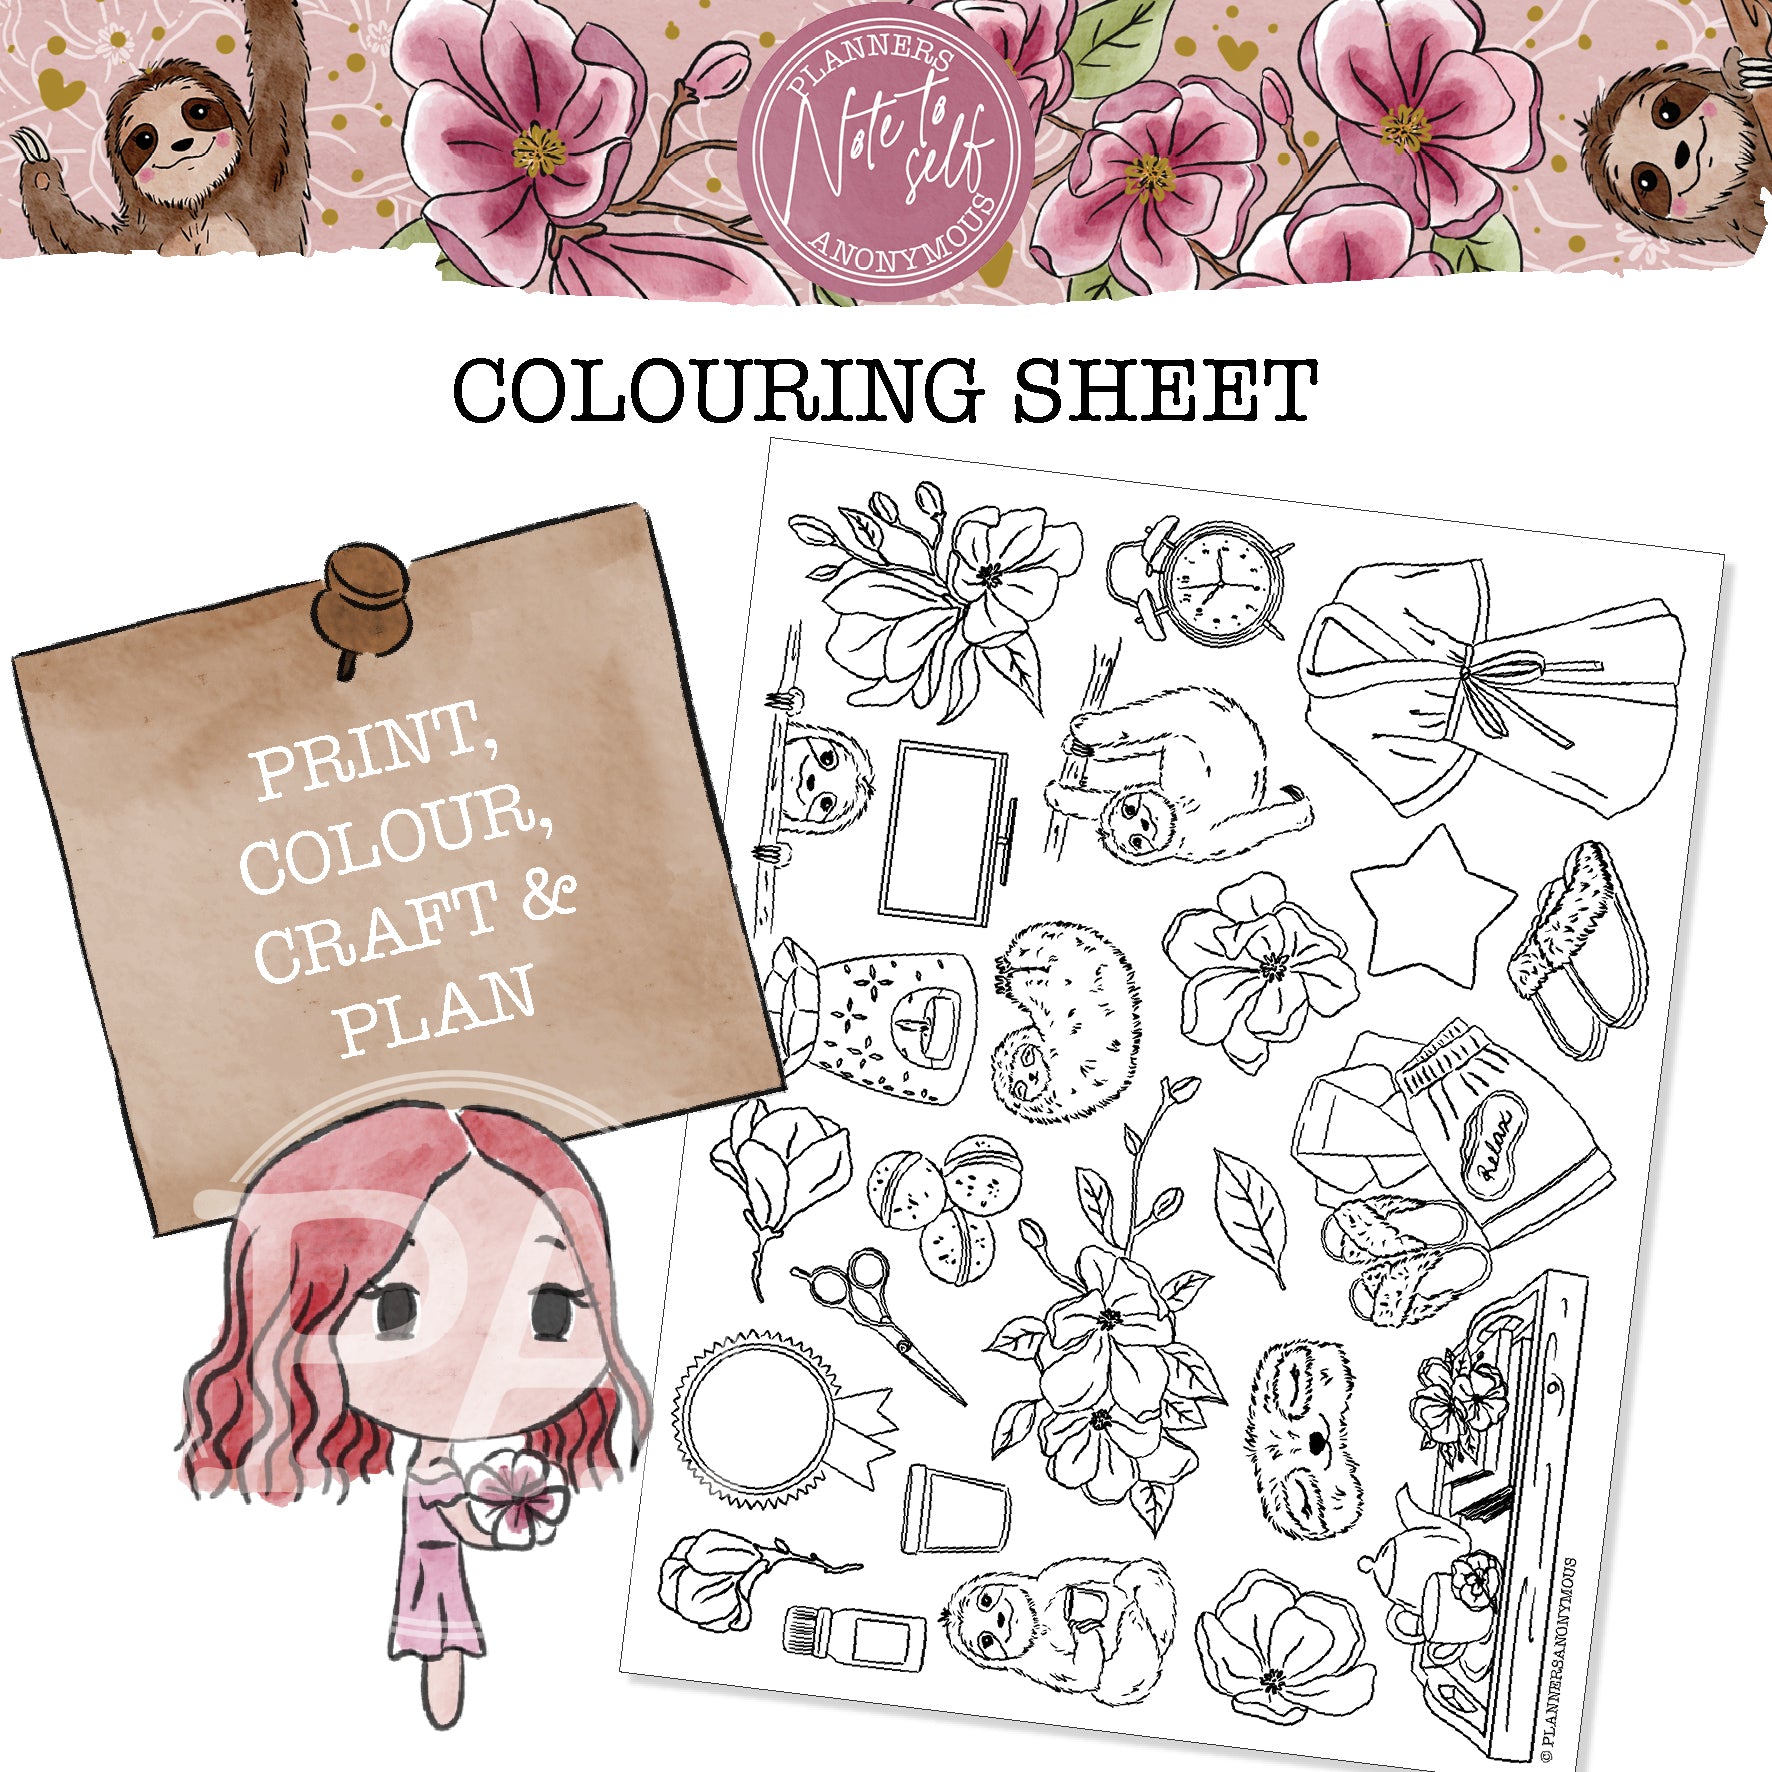 Note to Self Colouring Sheet